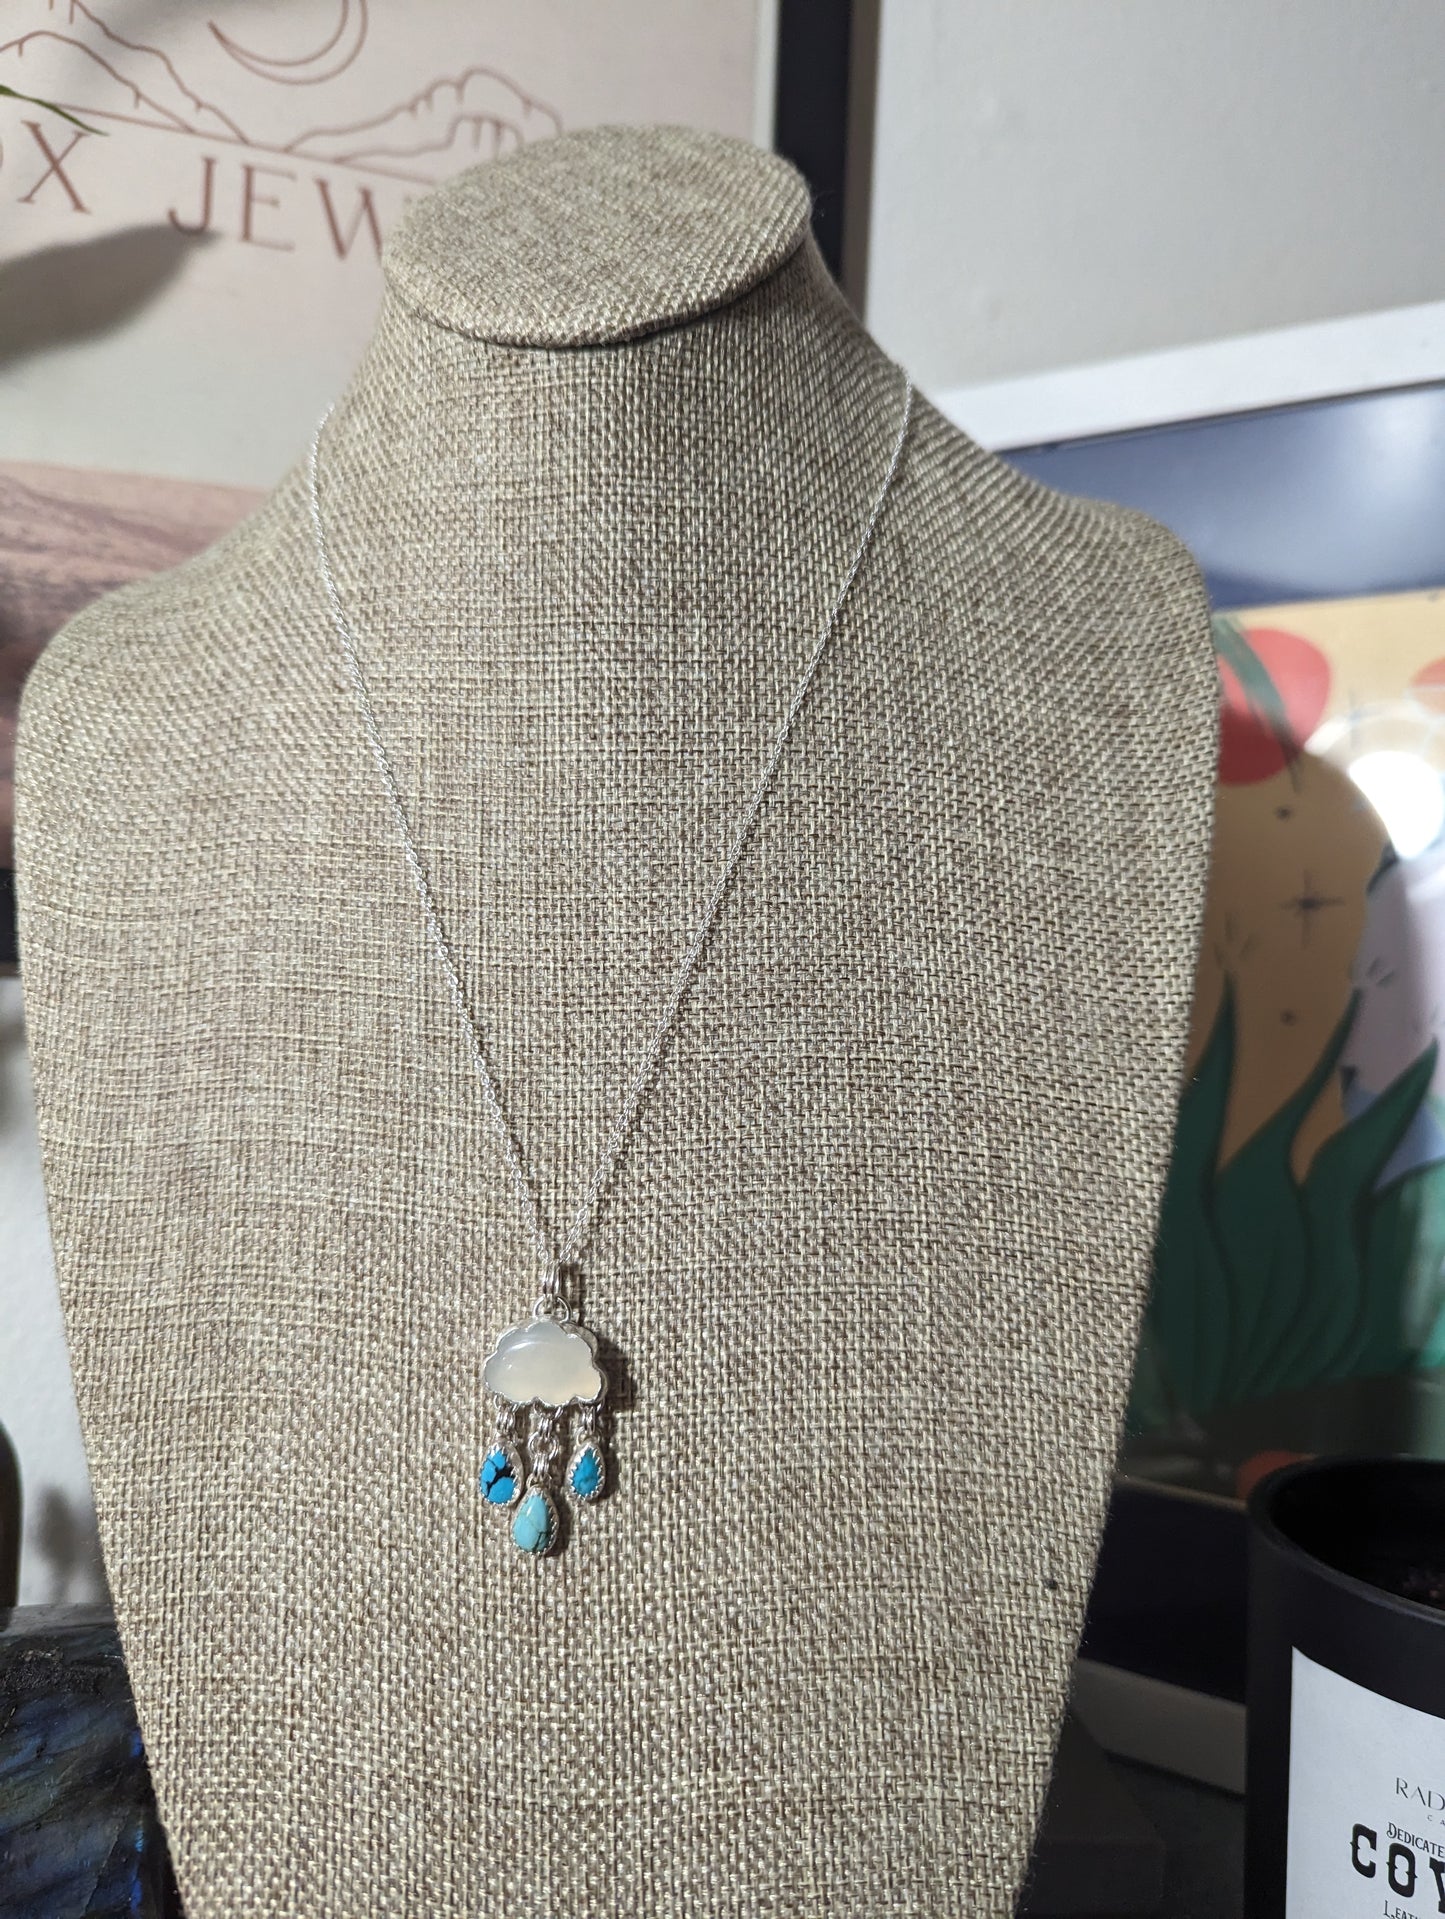 Moonstone and Turquoise Droplets Sterling Silver Necklace (MTO)